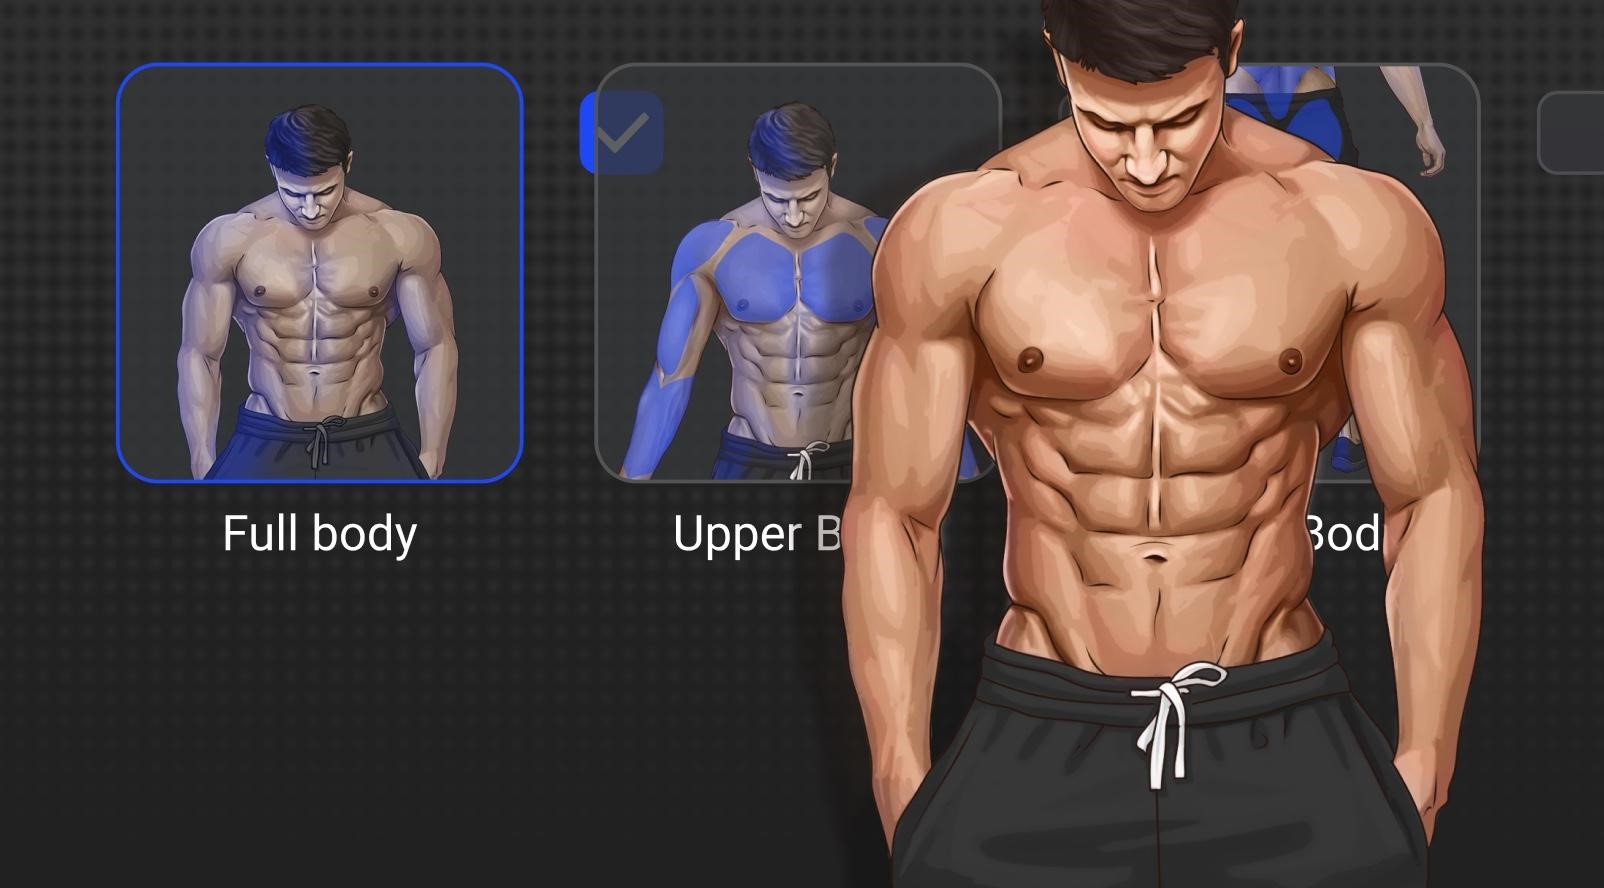 Muscle Booster: A Great Opportunity to Get Your Muscles in Shape - imagem de novidades em imei.info